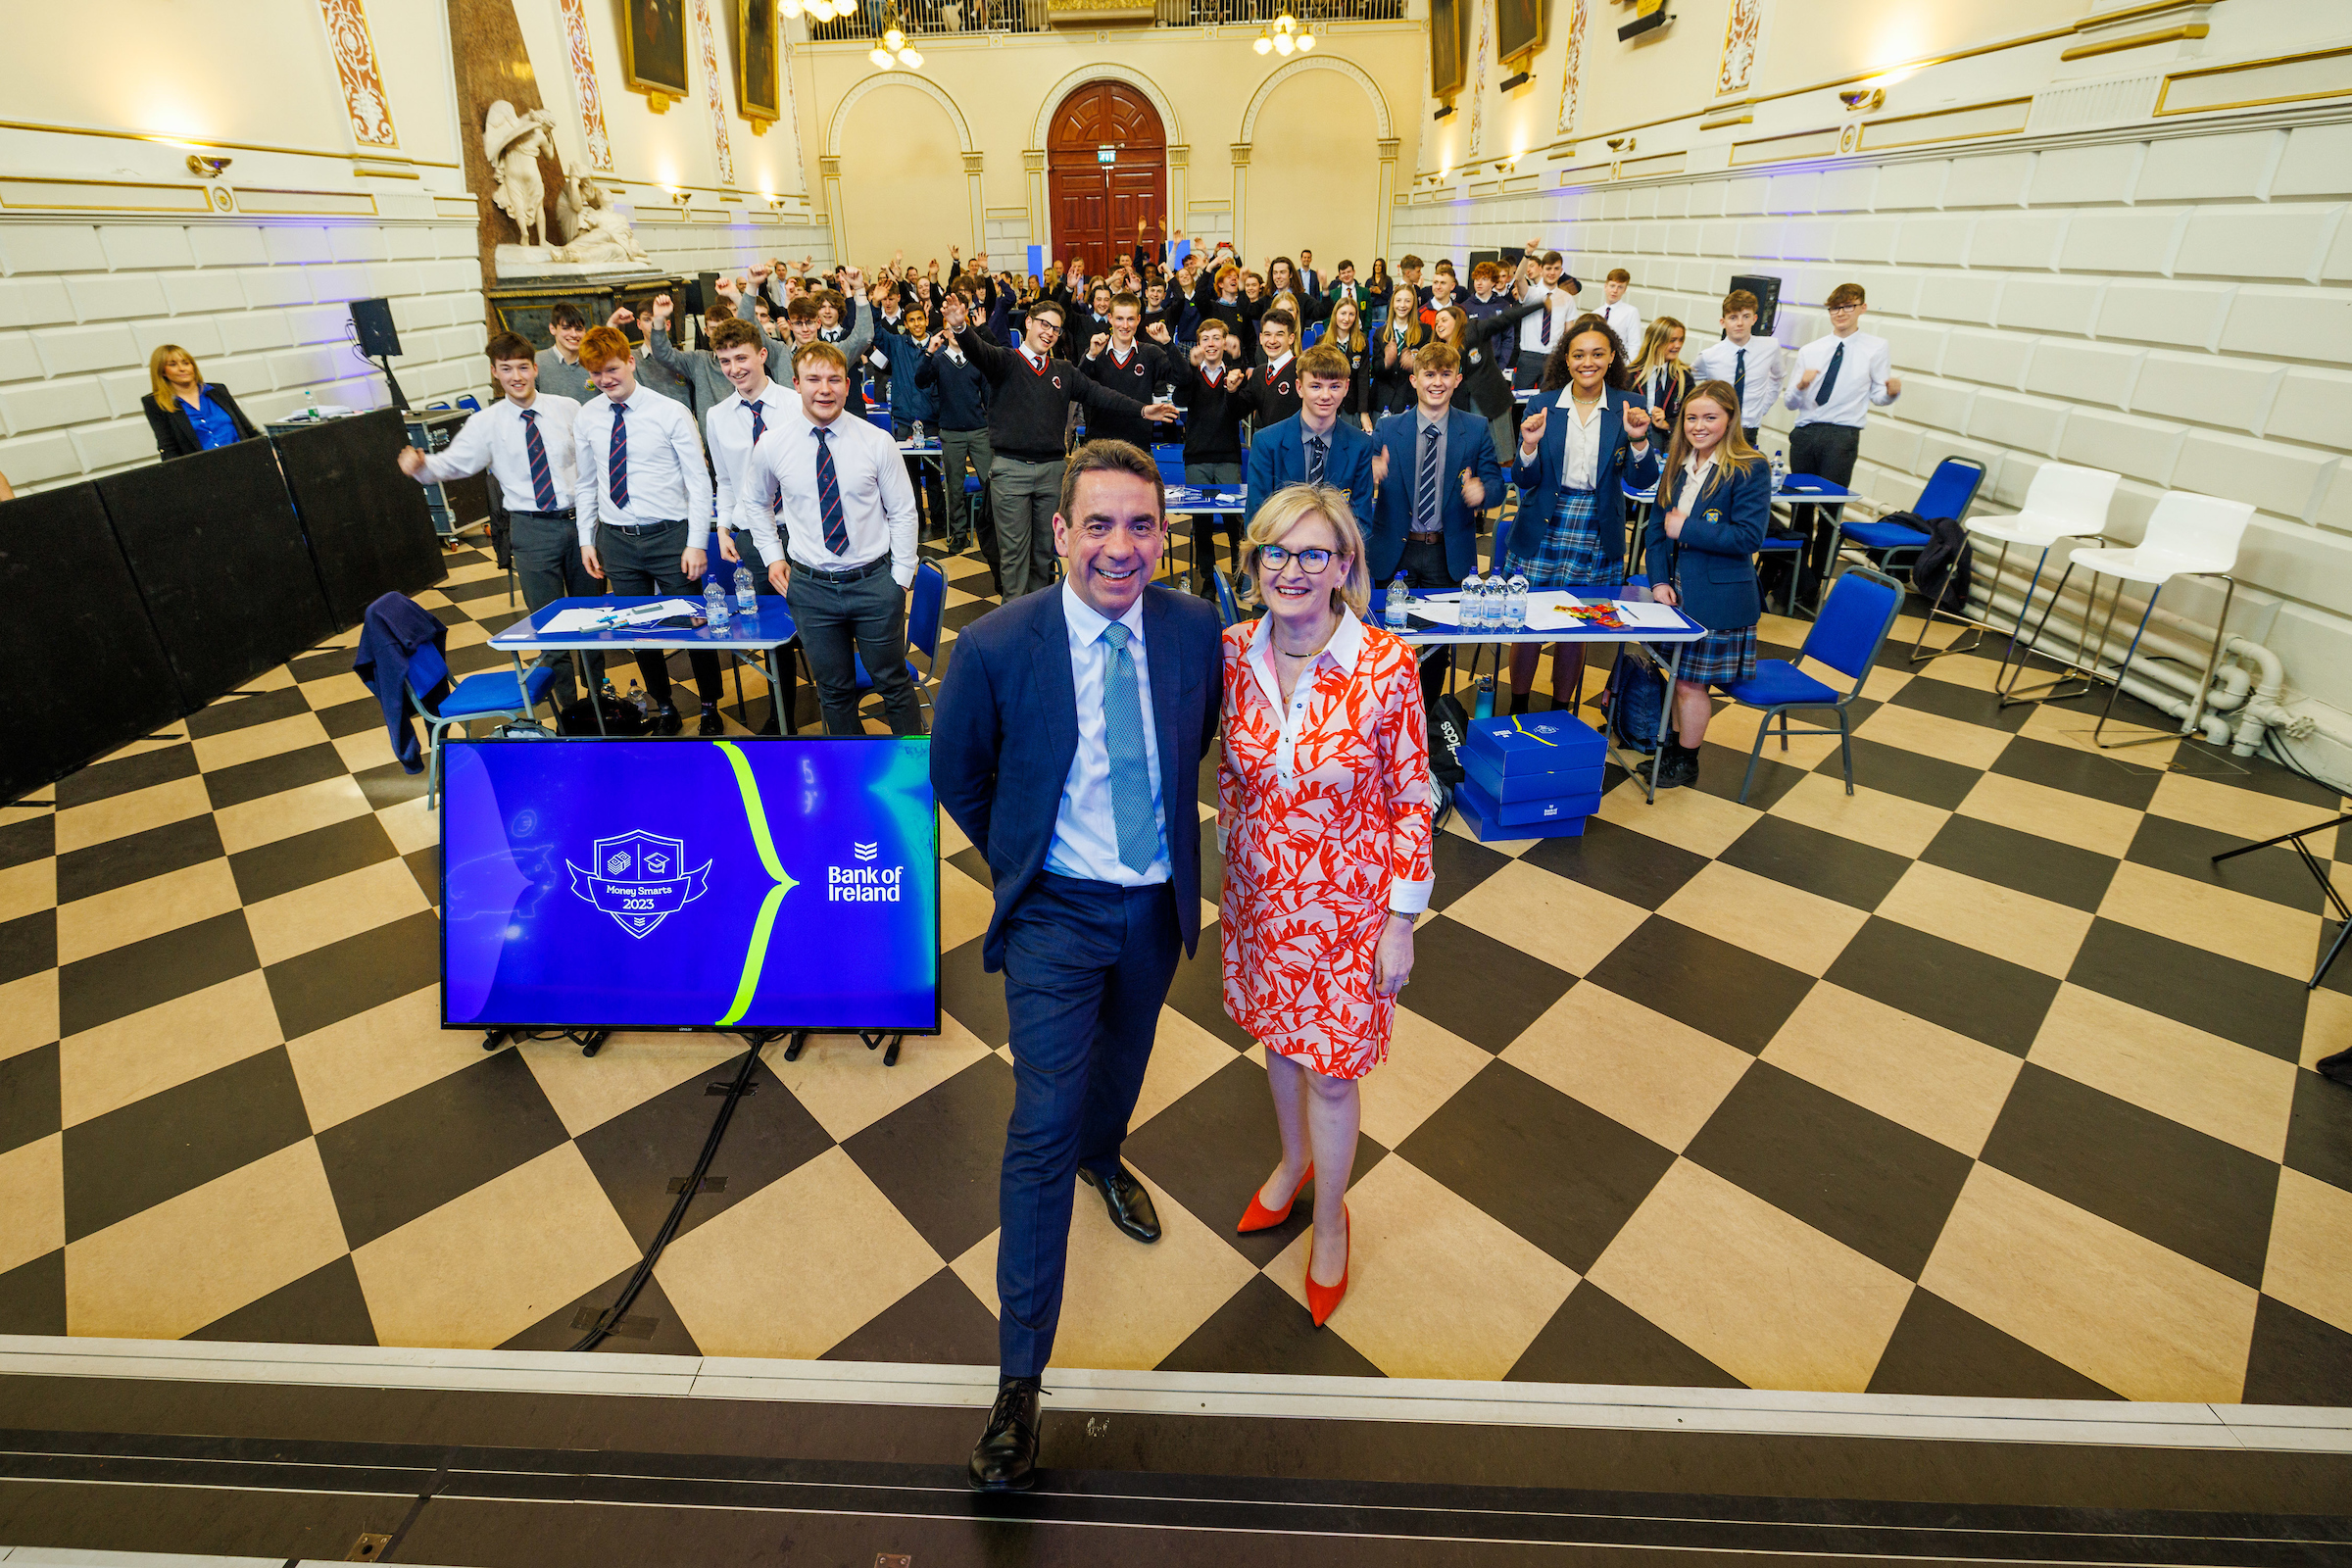 Myles O’Grady (CEO) and Mairead McGuinness (European Commissioner) alongside all 16 teams competing in the Money Smarts Quiz Challenge Grand Final in Trinity College Exam Hall, 12 May 2023.